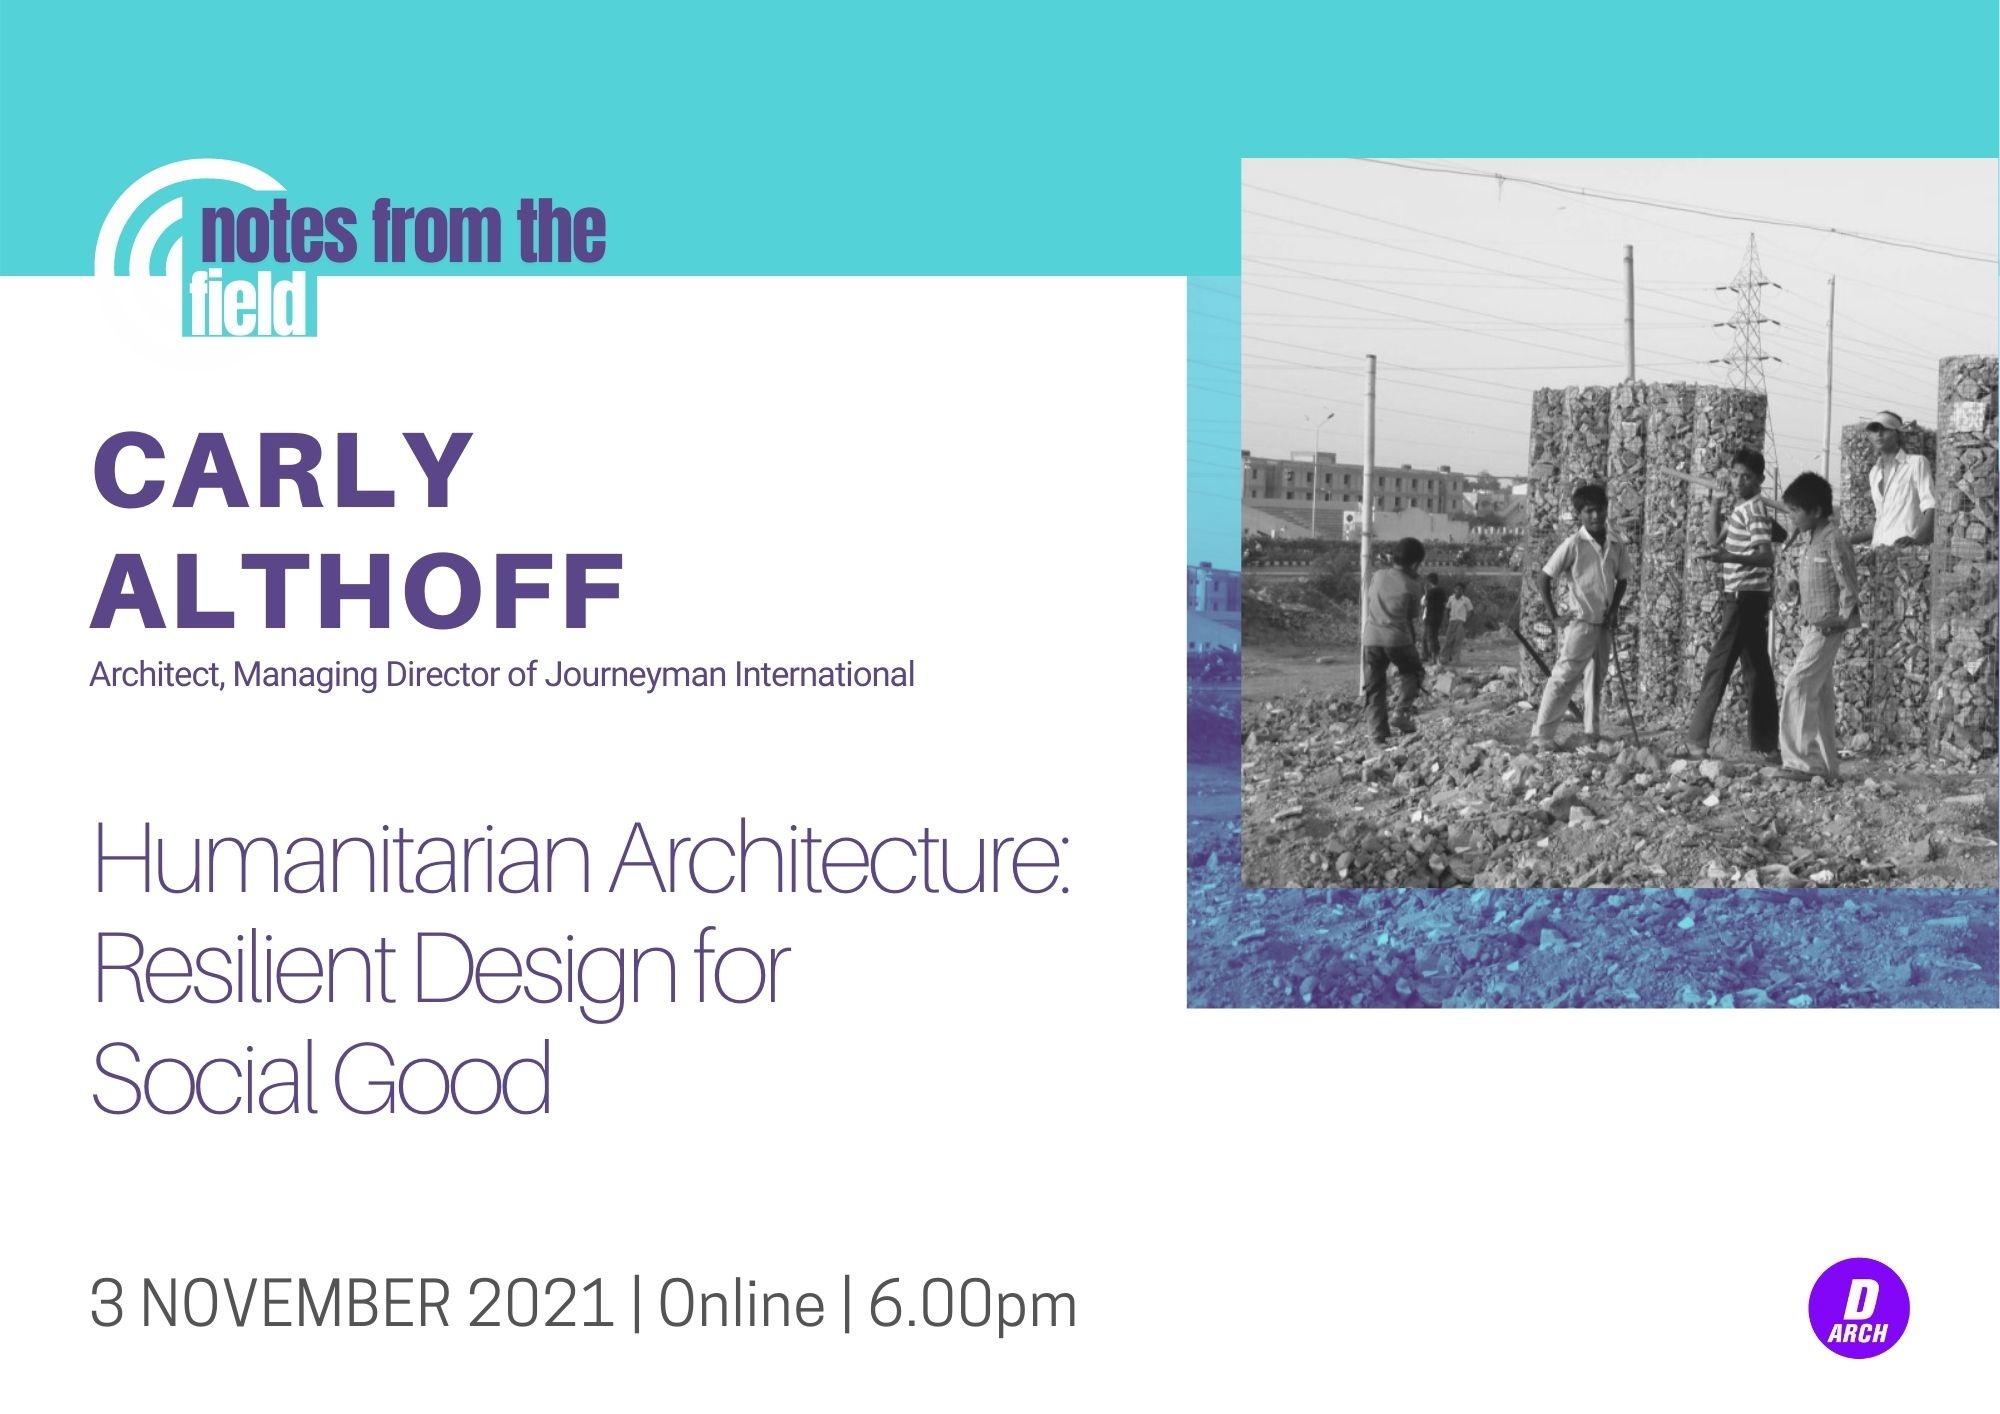 Notes from the Field: Carly Althoff "Humanitarian Architecture: Resilient Design for Social Good"